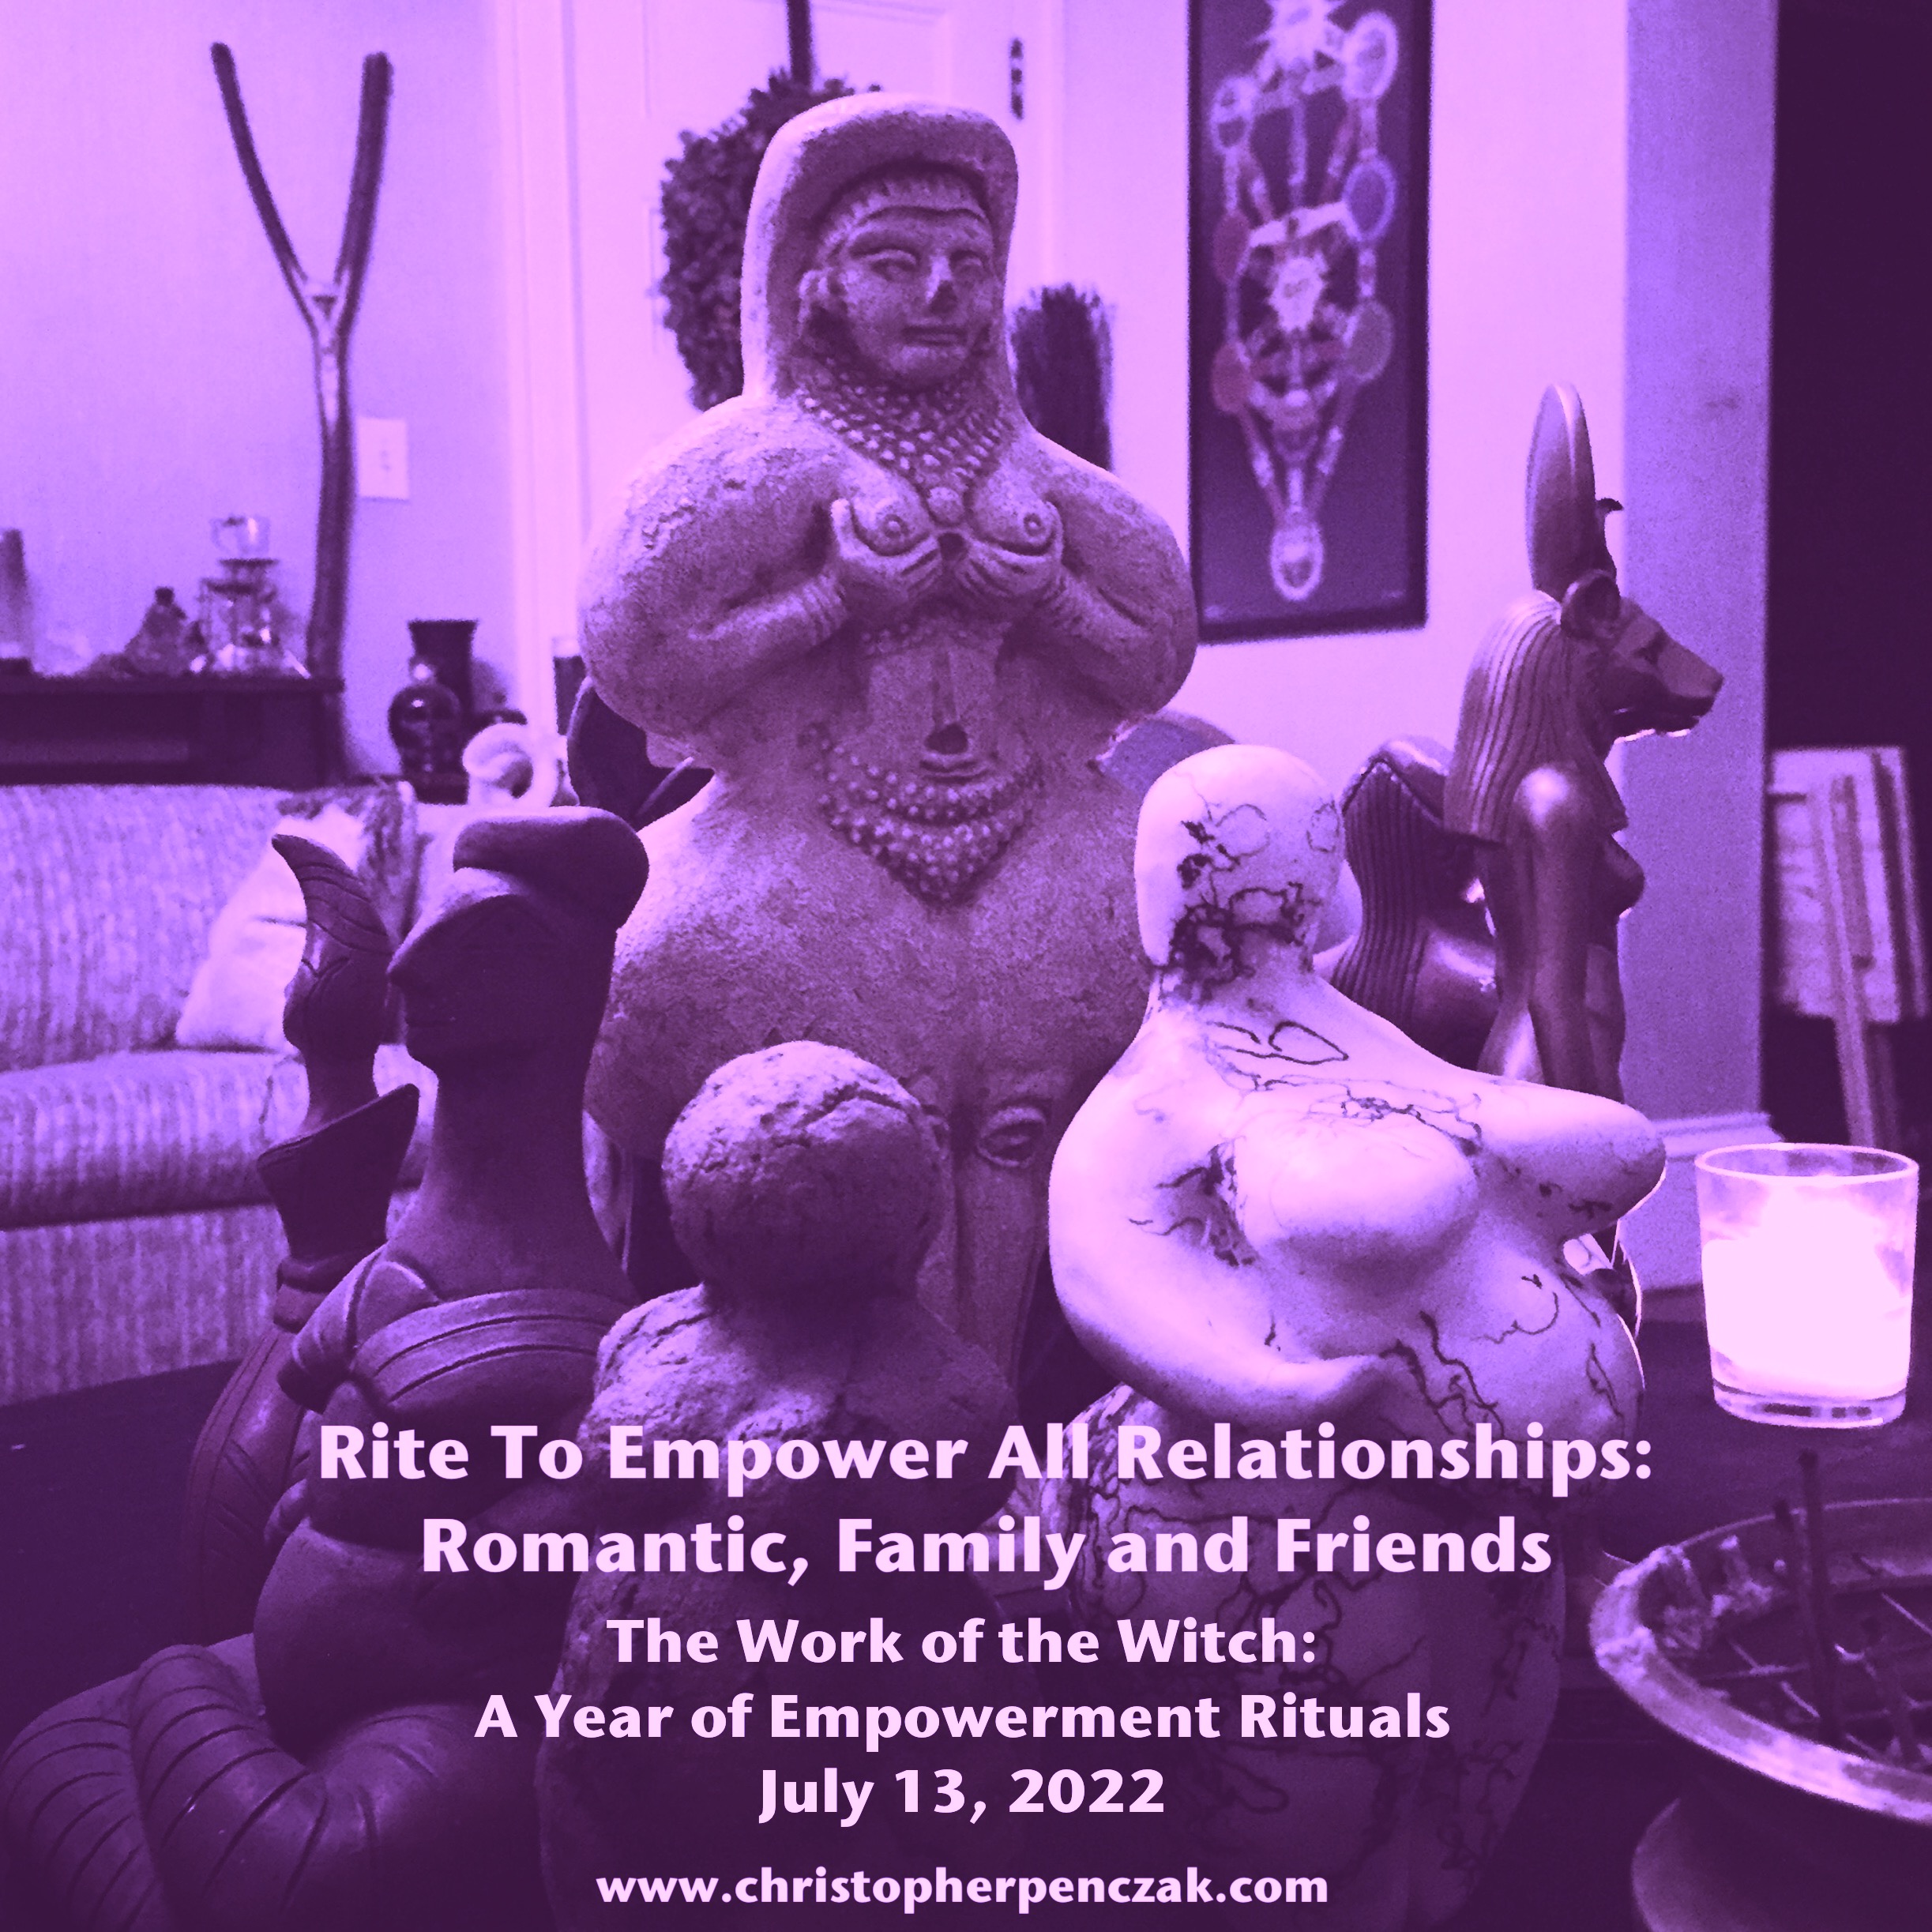 Rite To Empower All Relationships: Romantic, Family and Friends